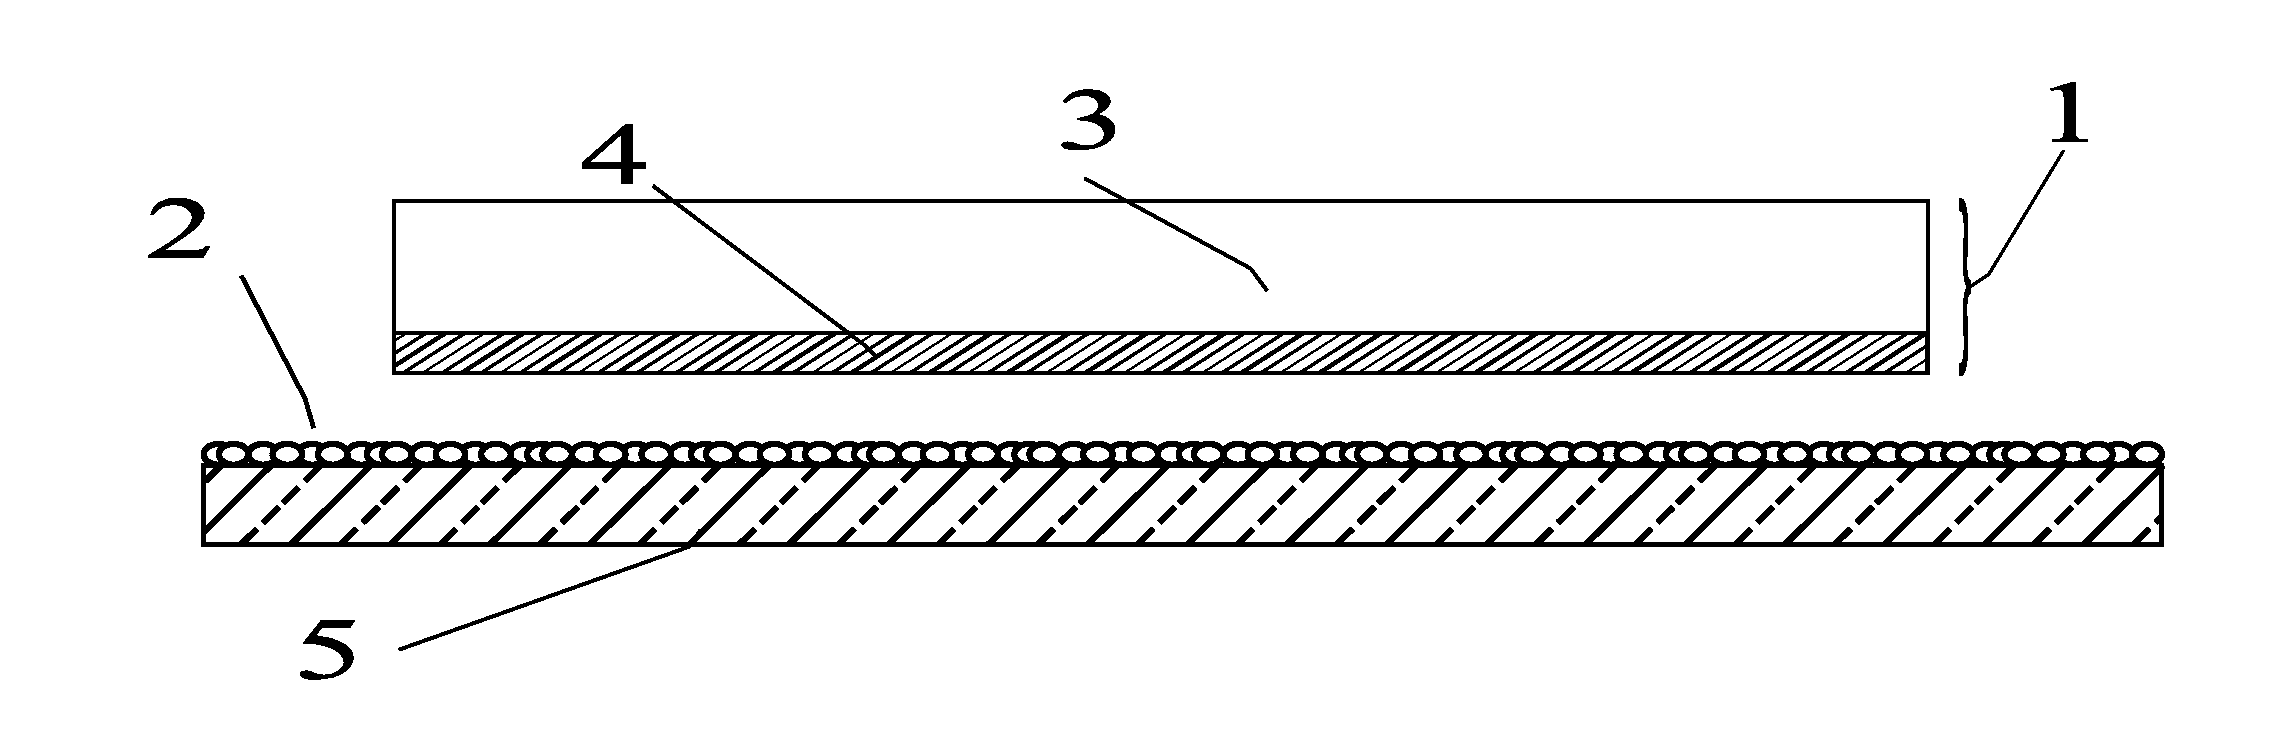 Process to attach thermal stencils to a glass substrate and permanently etch a mark therein